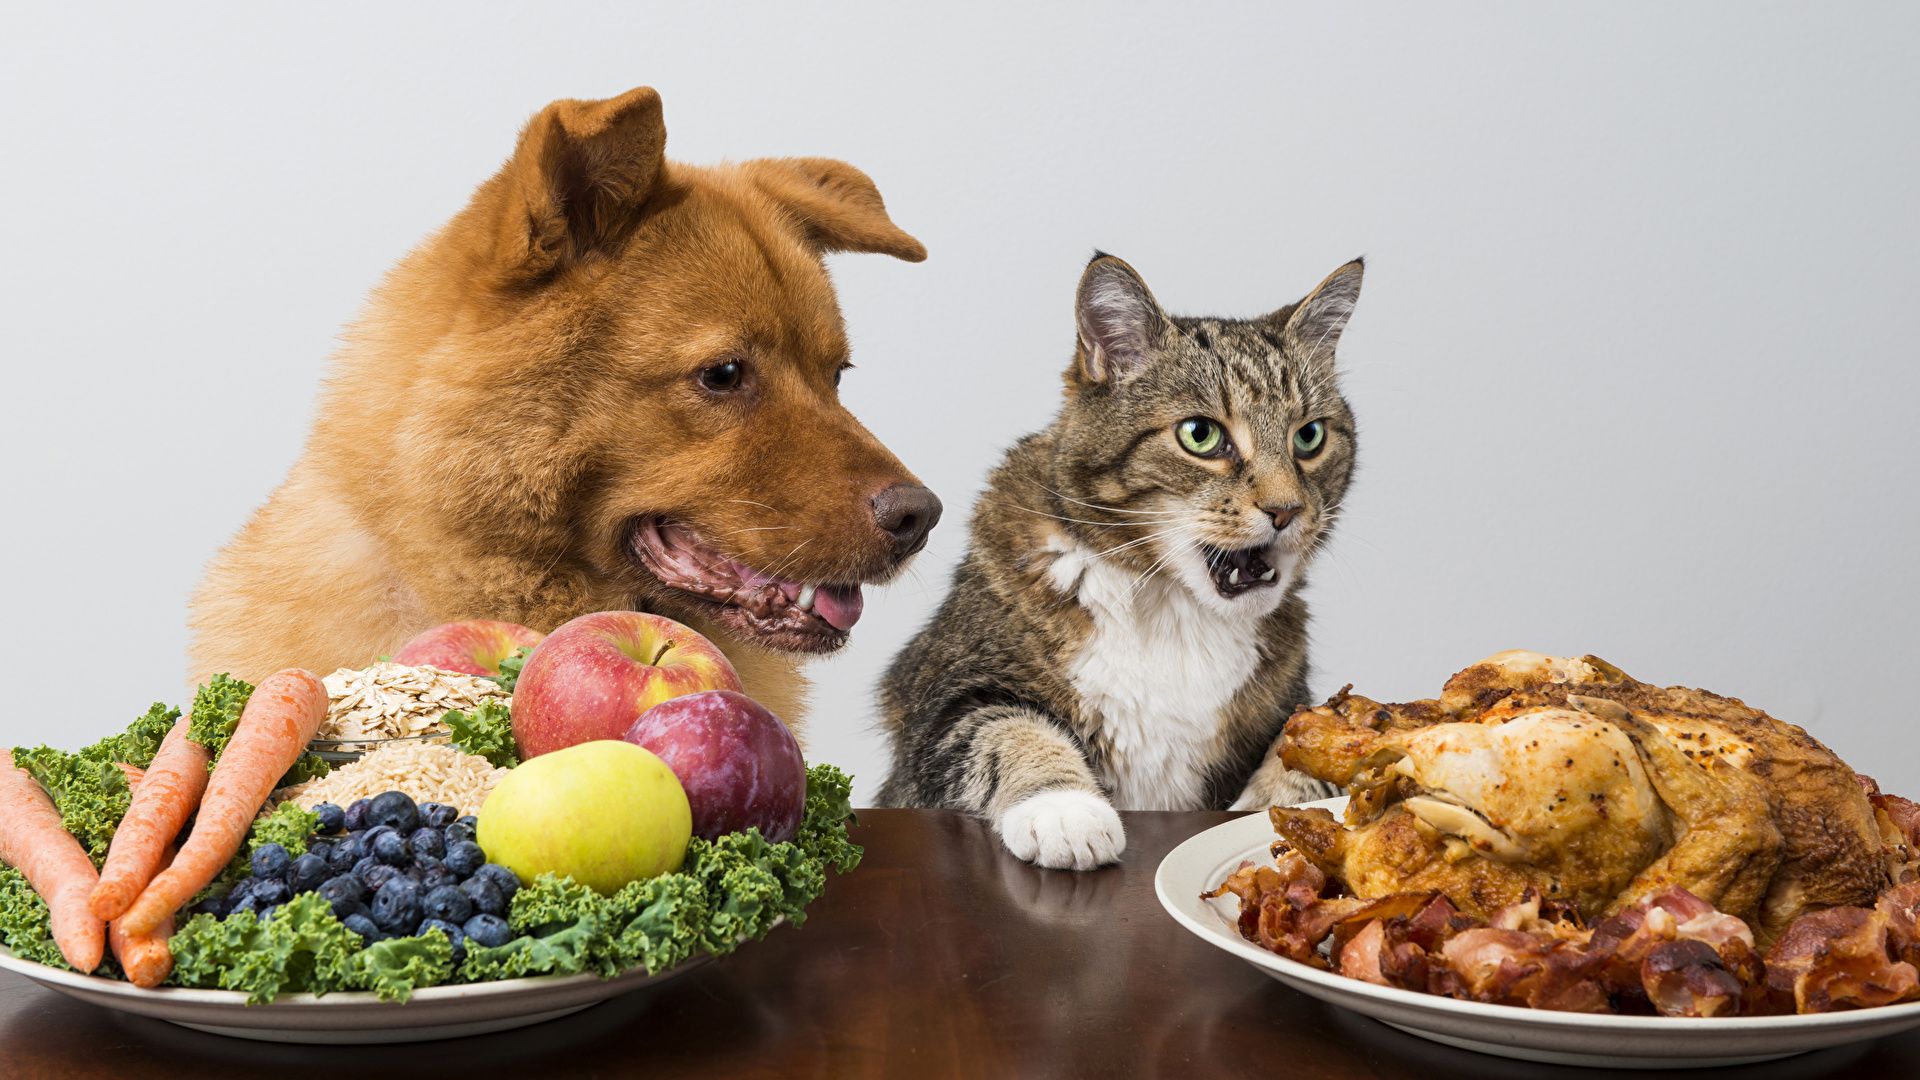 Photo cat Dogs Roast Chicken Fruit Plate Vegetables 1920x1080